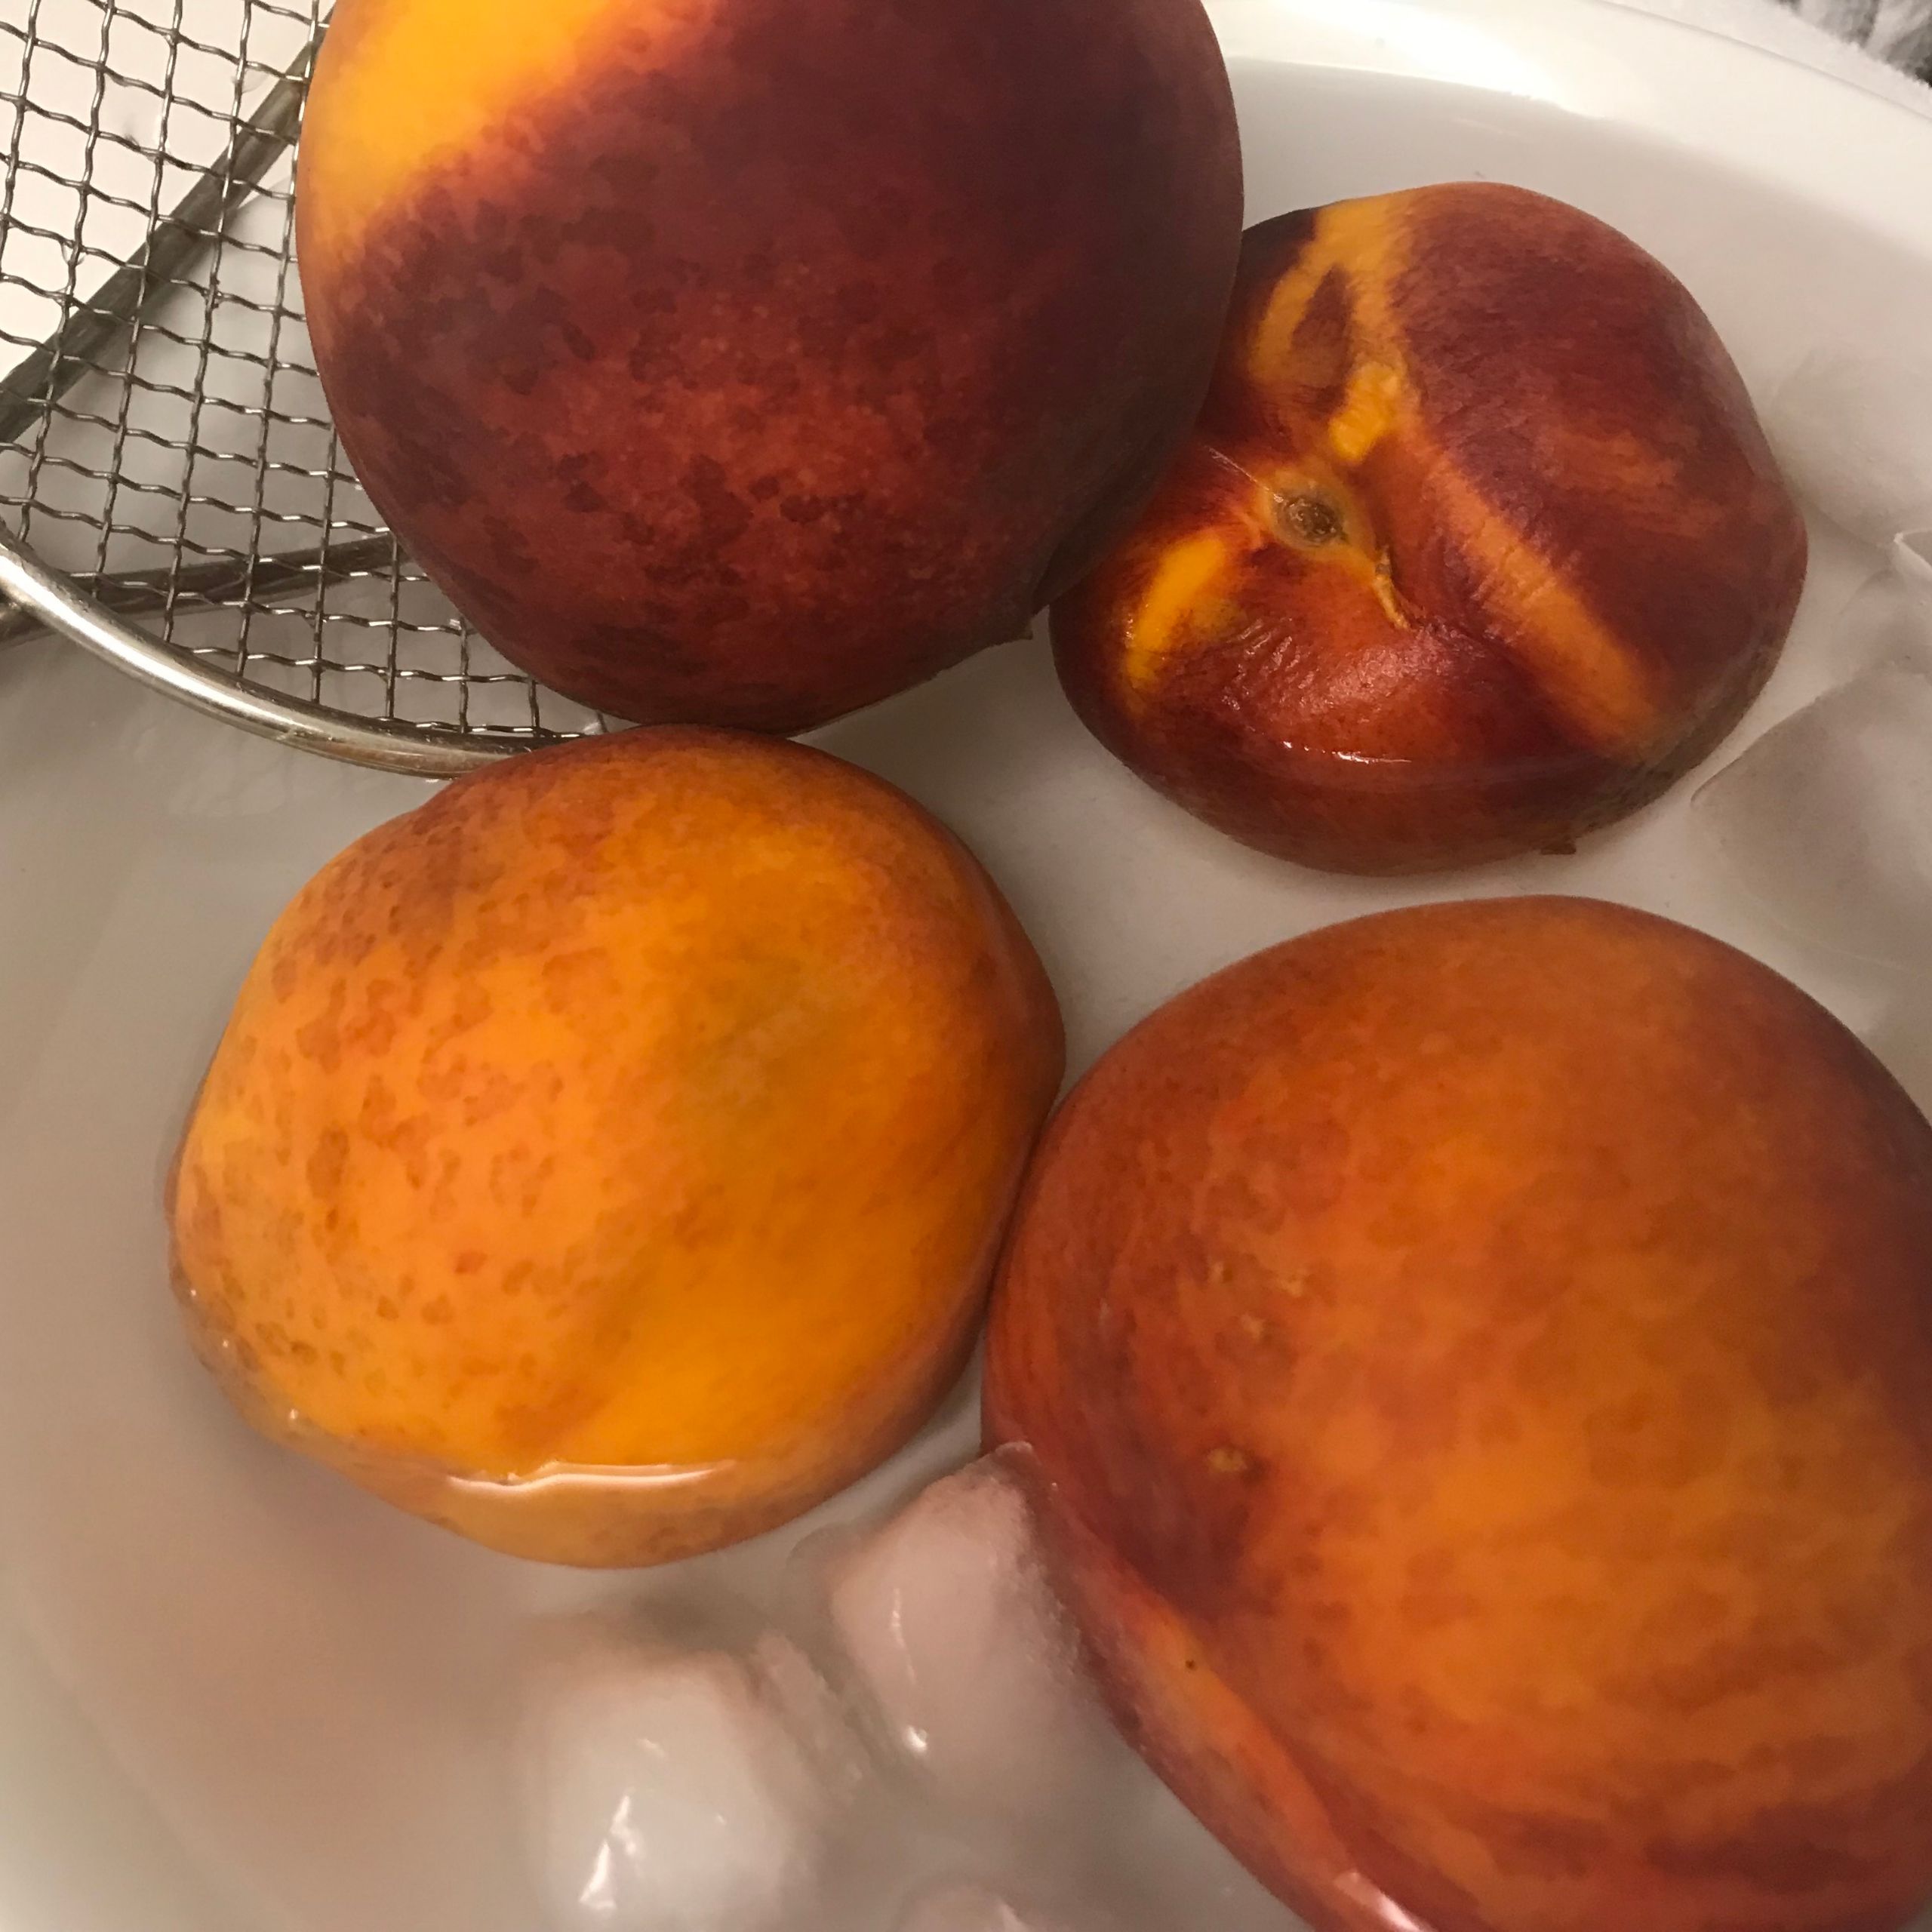 peaches being plunged in ice water